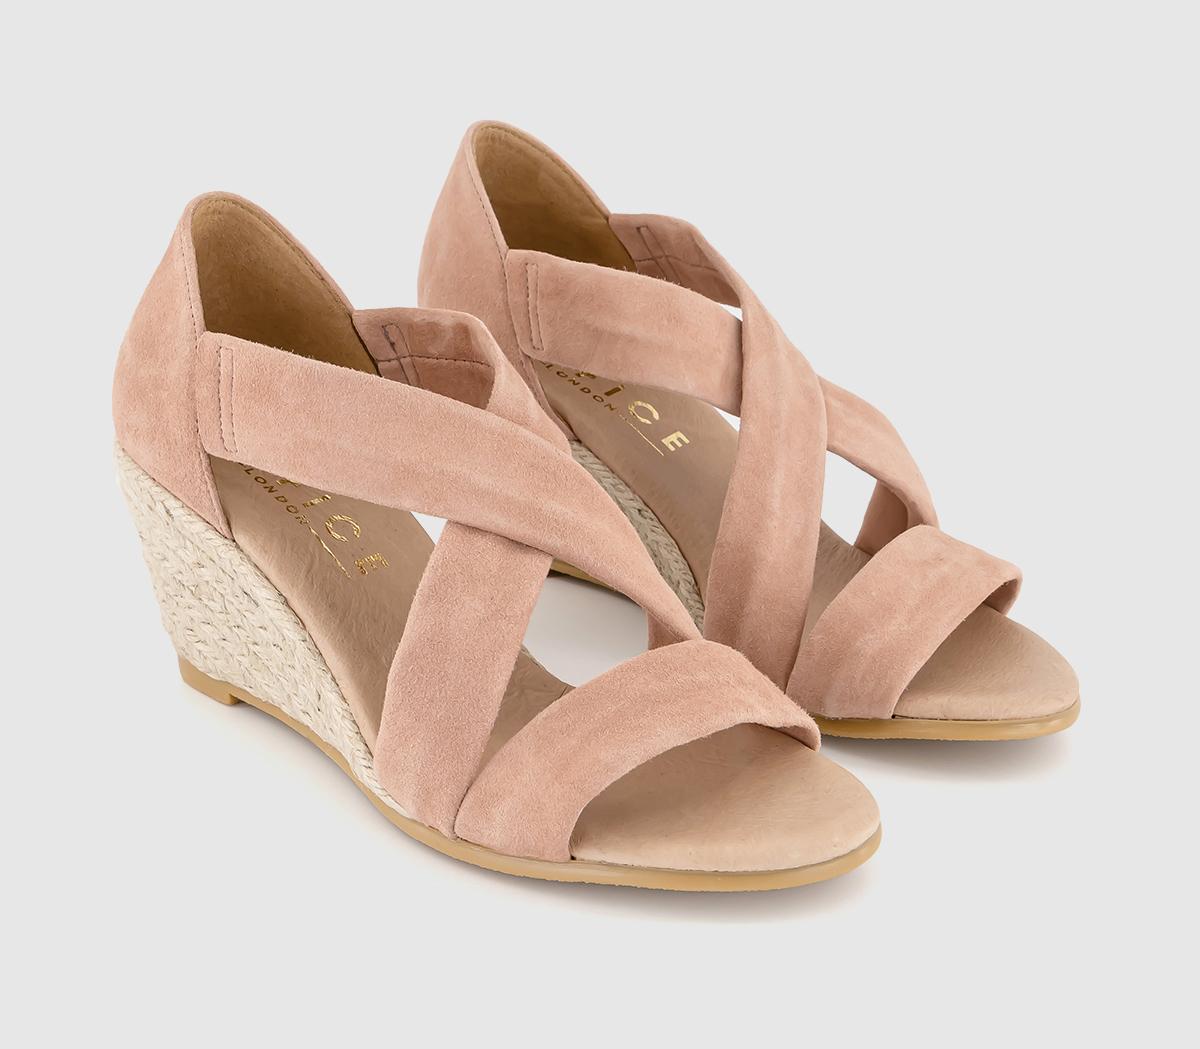 OFFICE Womens Women’s Pink Suede Nude Maiden Cross Strap Wedge Sandals, Size: 8